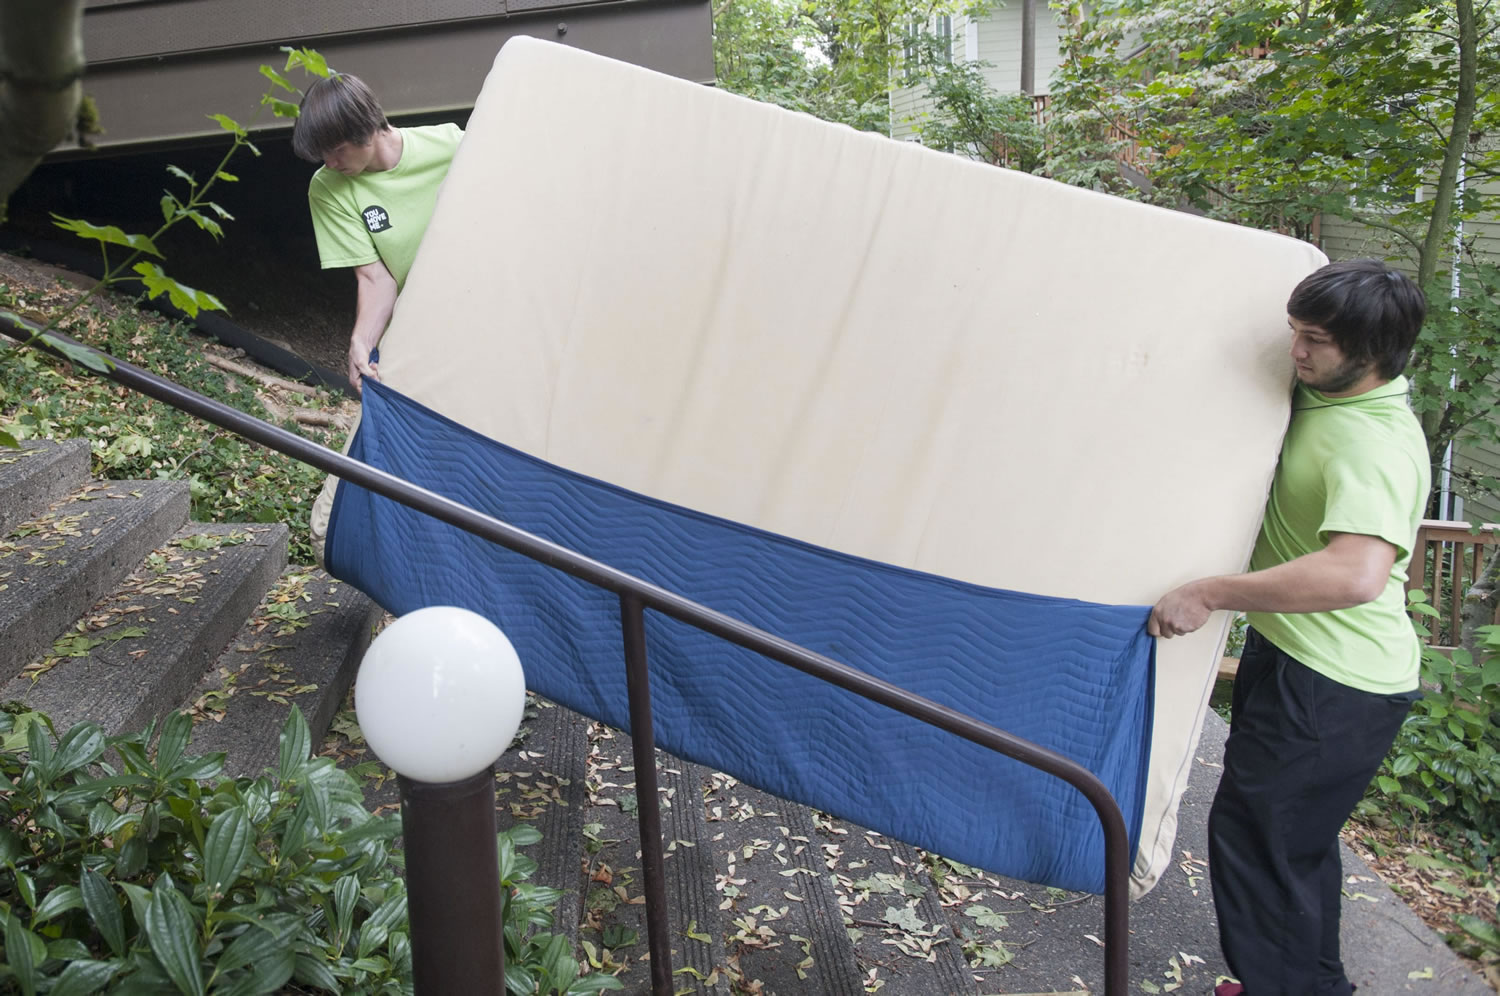 Movers Tim Stanley (L) and Quinten Martinez (R) navigate a box spring up a flight of steps at an apartment complex in Portland Monday August 31, 2015. Census data shows more people moving to Clark County than leaving, as of 2013, with inbound migration being mostly from the Portland area.